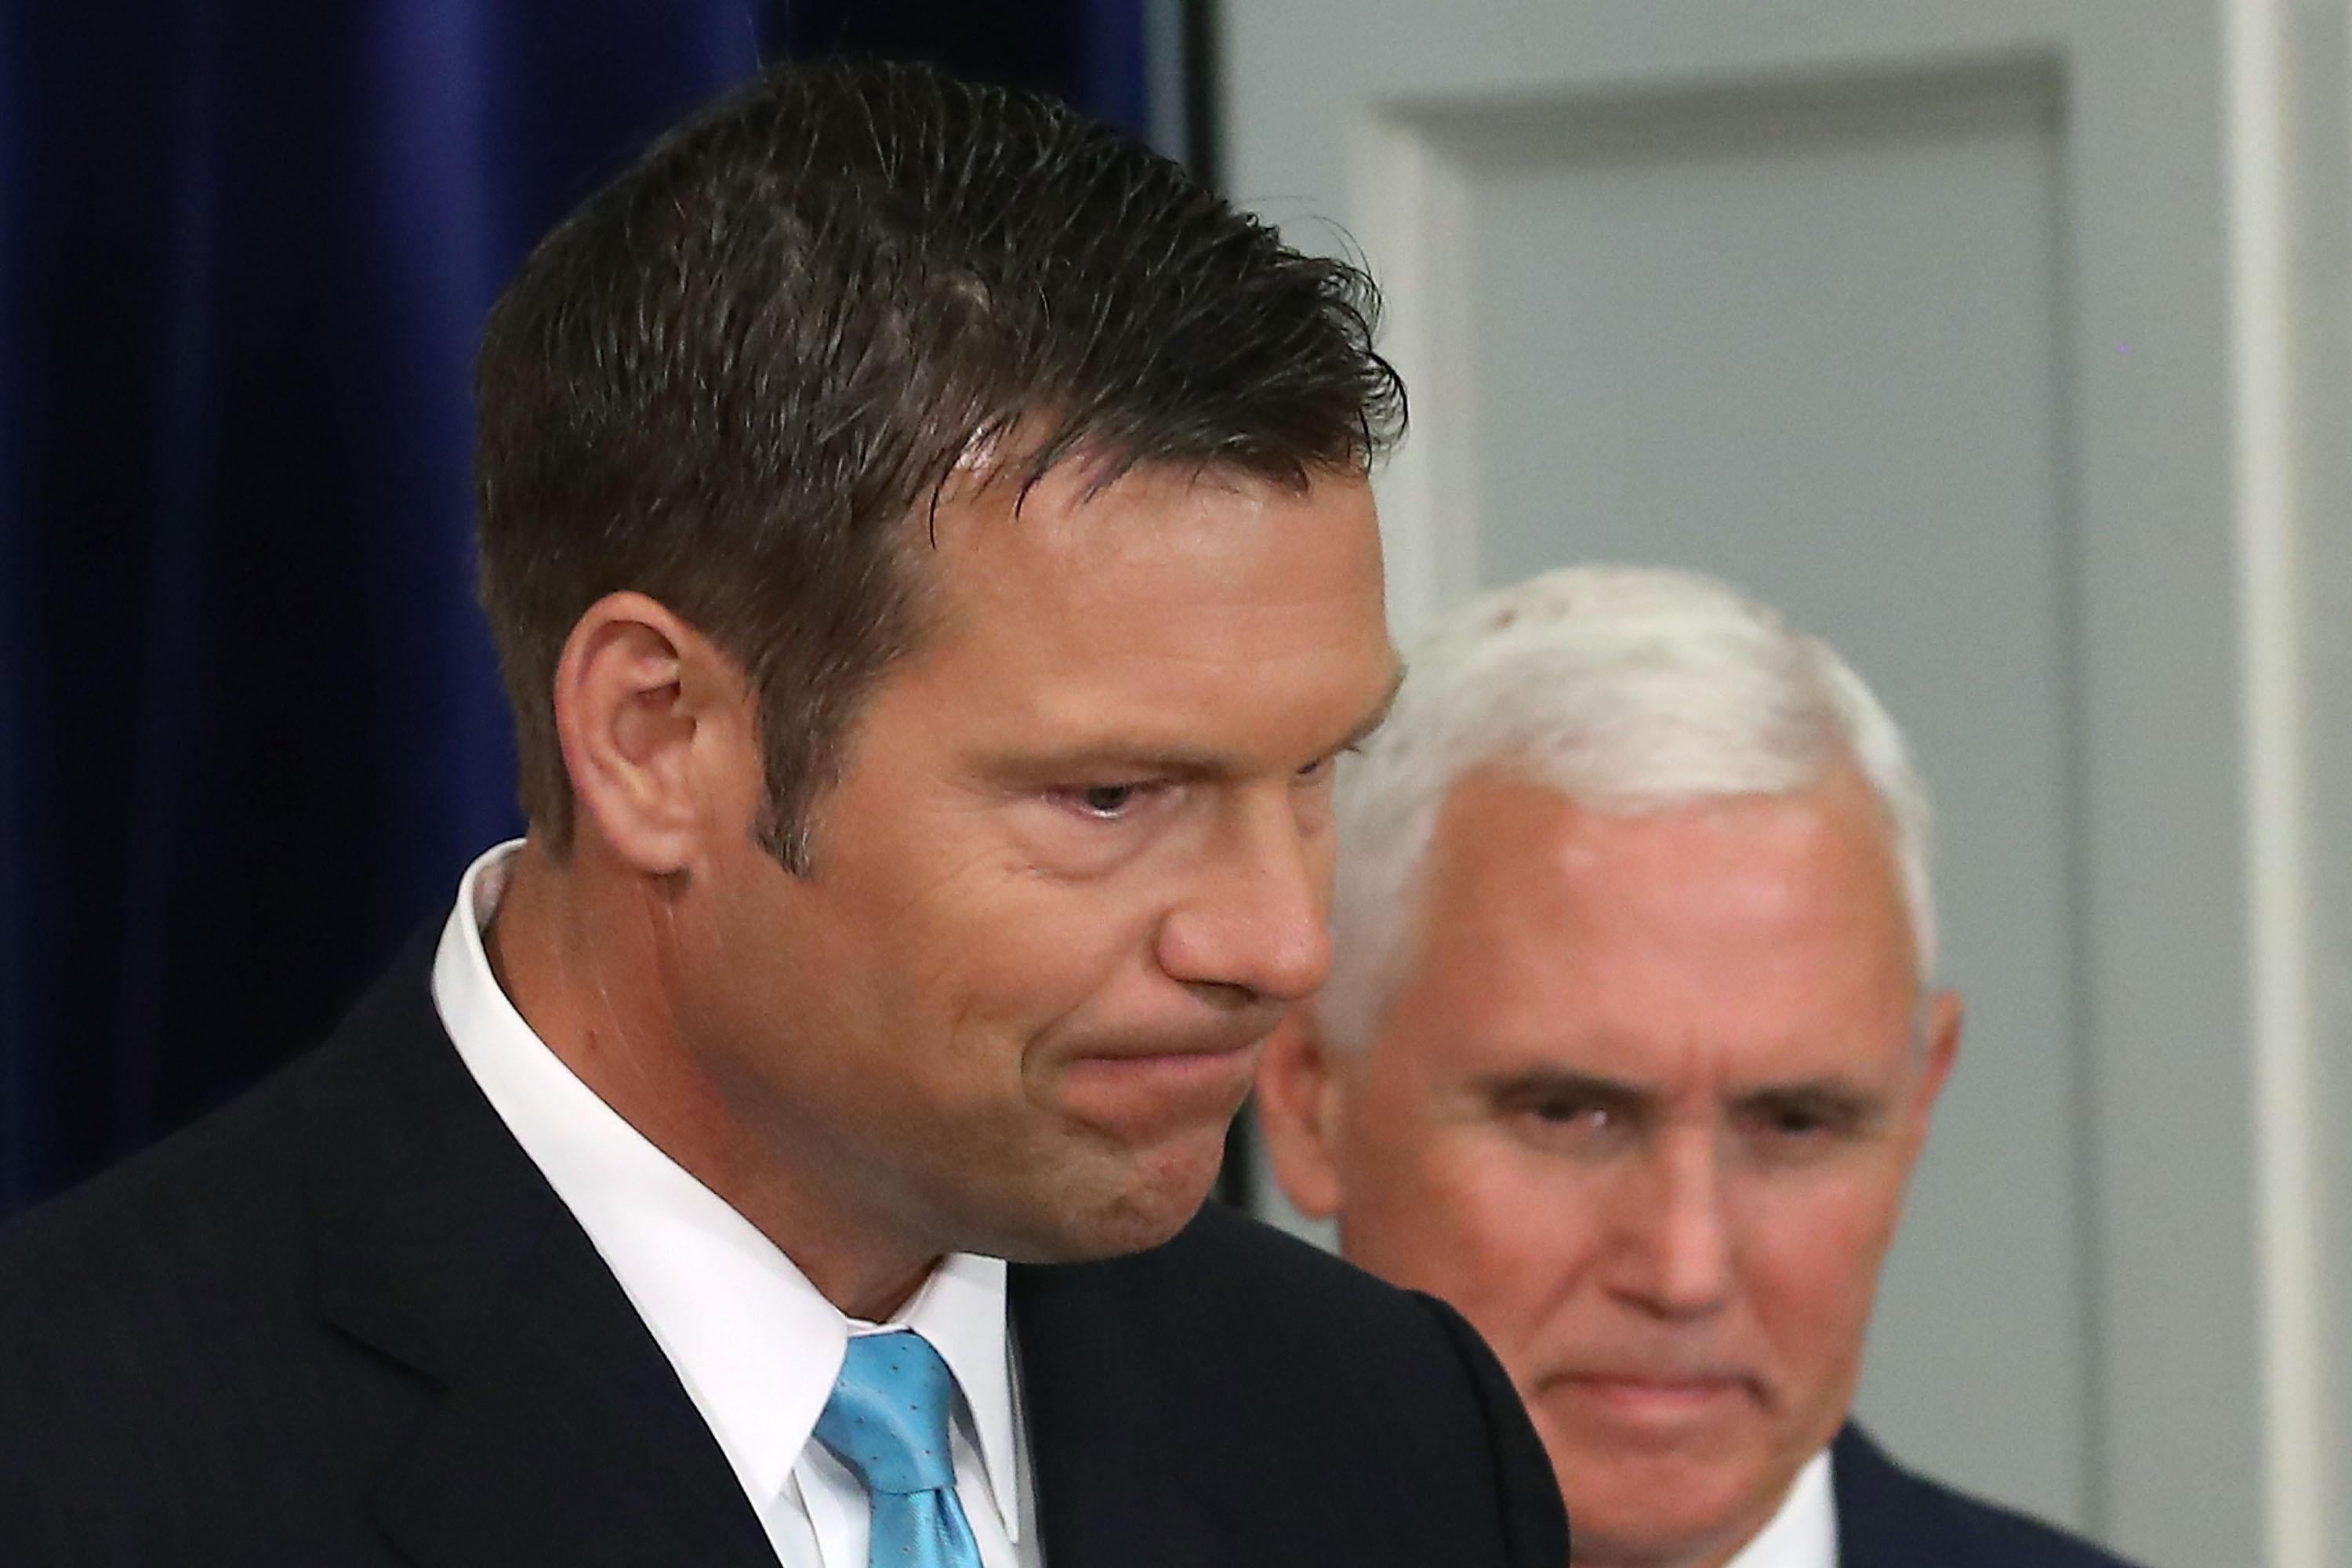 WASHINGTON, DC - JULY 19: Kansas Secretary of State, Kris Kobach (L) and US Vice President Mike Pence, attend the first meeting of the Presidential Advisory Commission on Election Integrity in the Eisenhower Executive Office Building, on July 19, 2017 in Washington, DC.  (Photo by Mark Wilson/Getty Images)